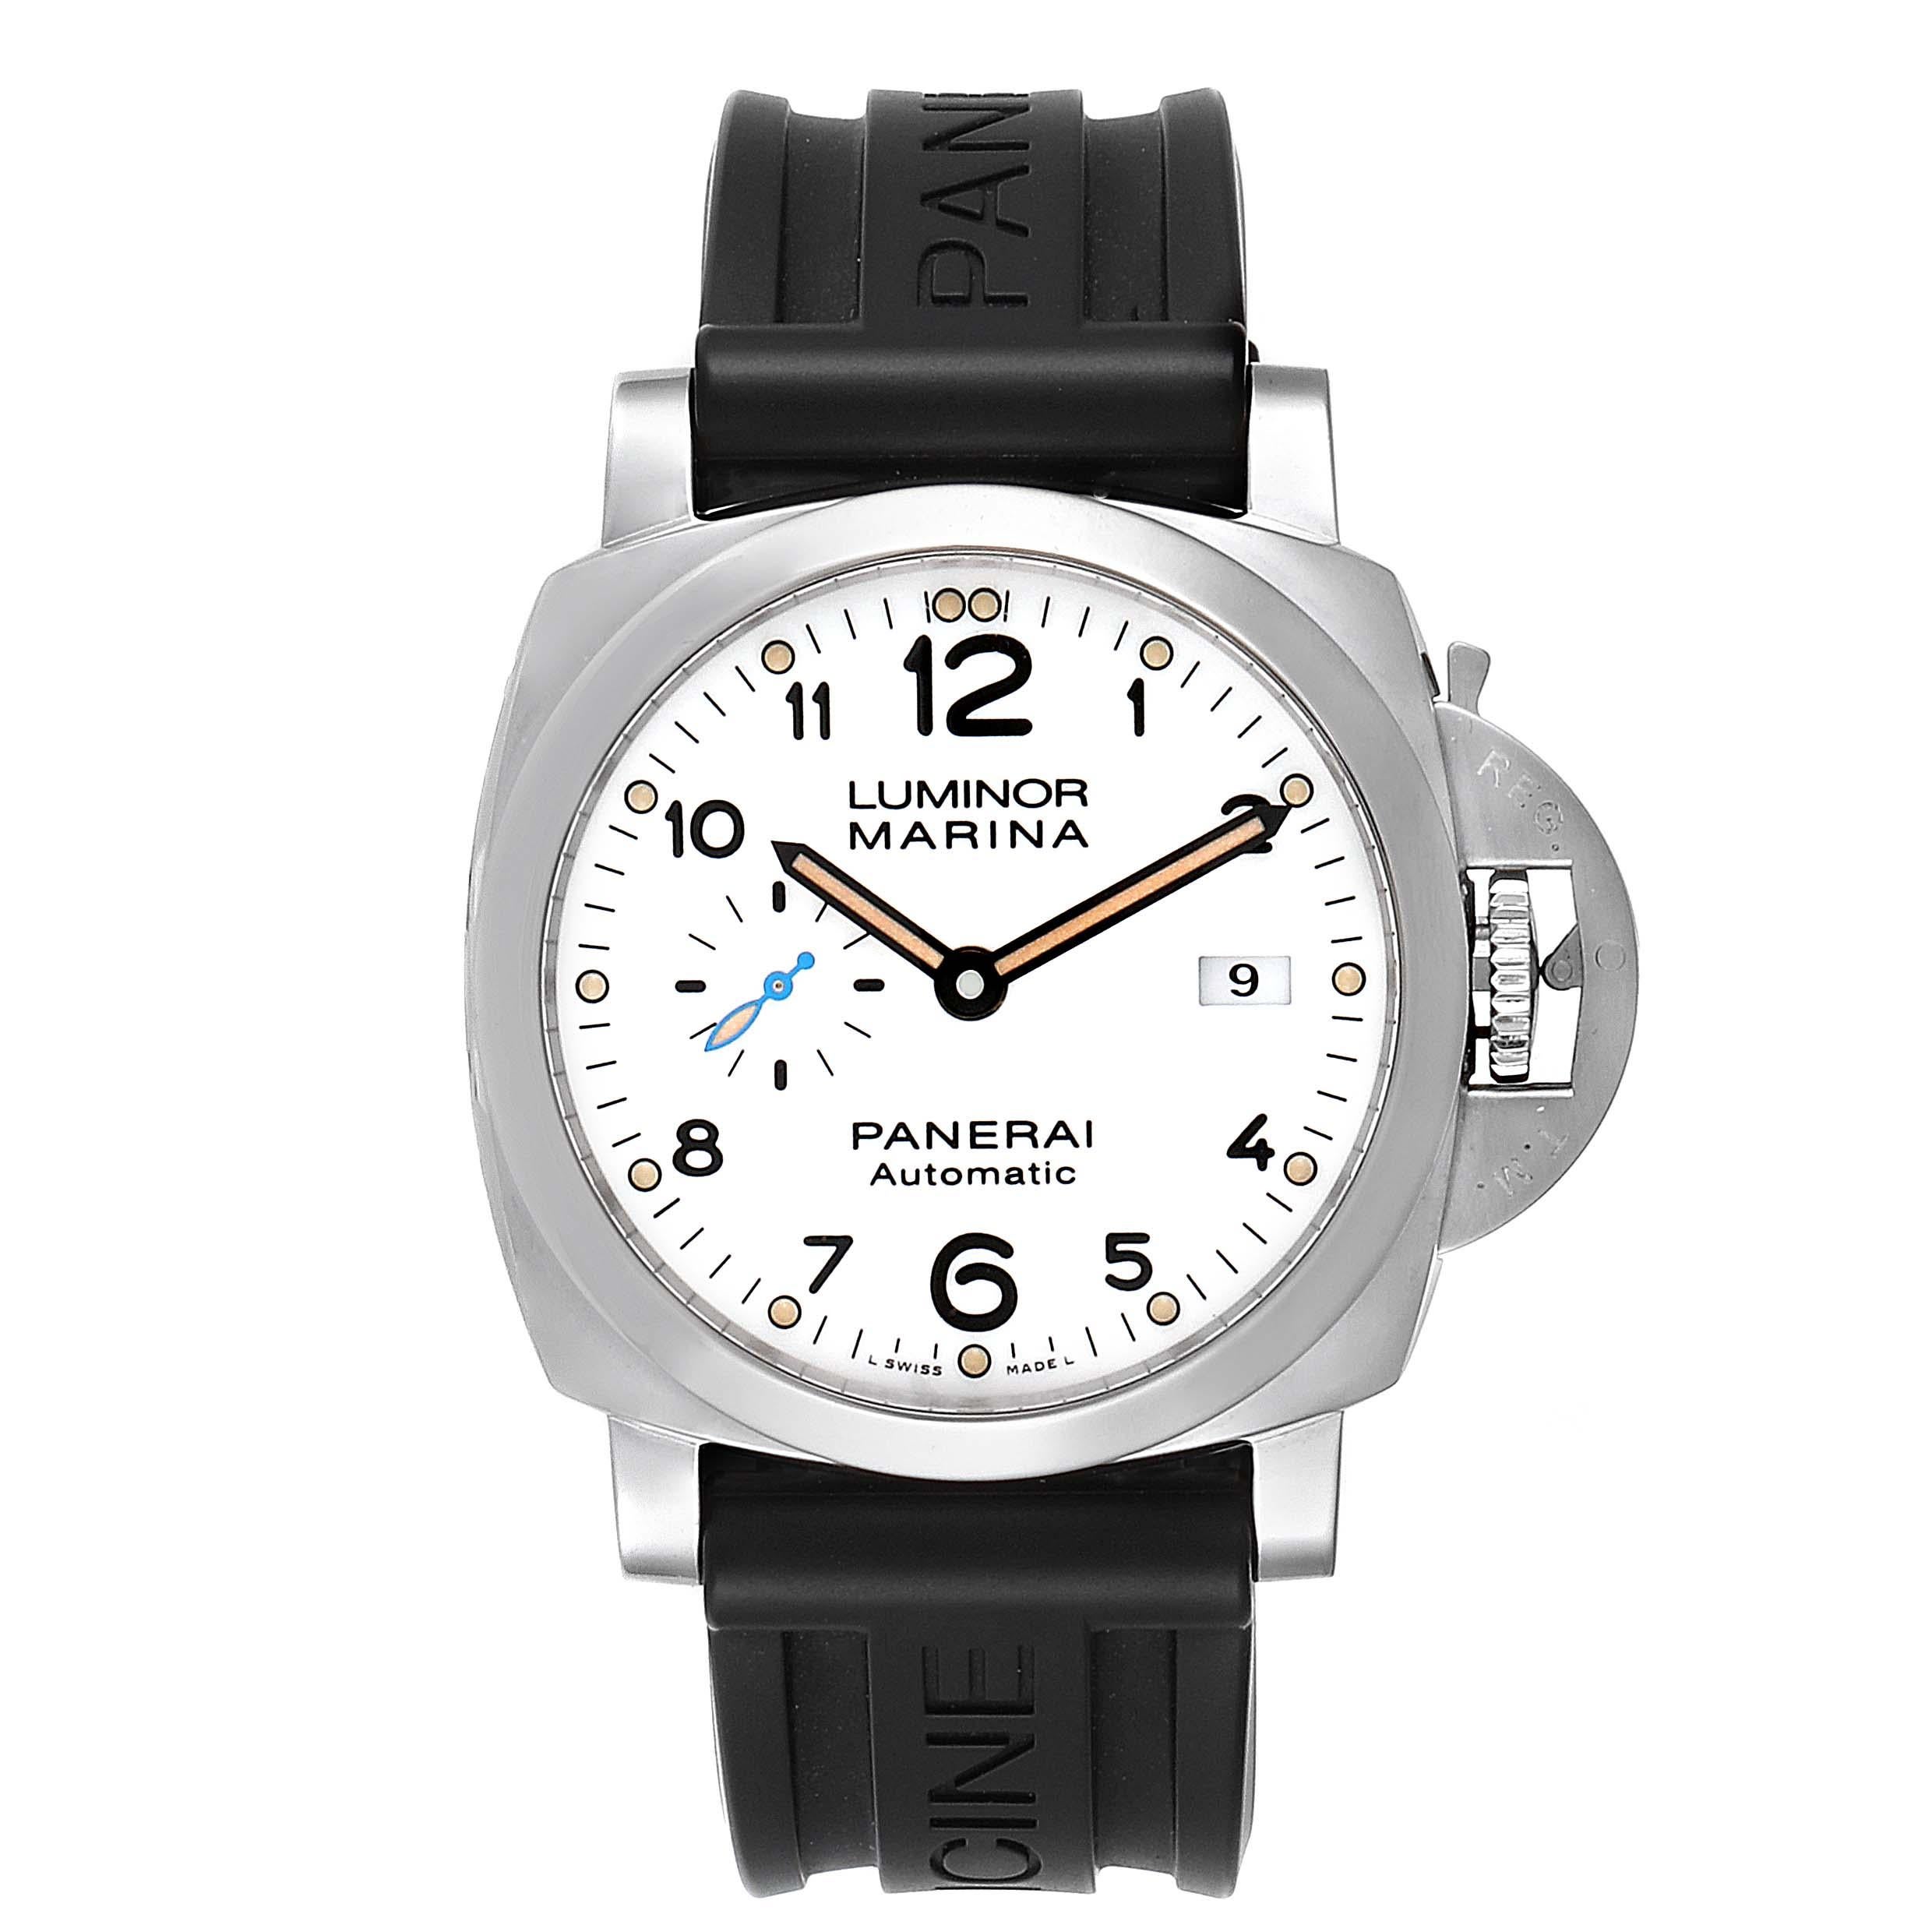 Panerai Luminor Marina 1950 White Dial Automatic Watch PAM01499 Box Papers. Automatic self-winding-winding movement. Two part cushion shaped stainless steel case 44.0 mm in diameter. Panerai patented crown protector. Transparrent exhibition case